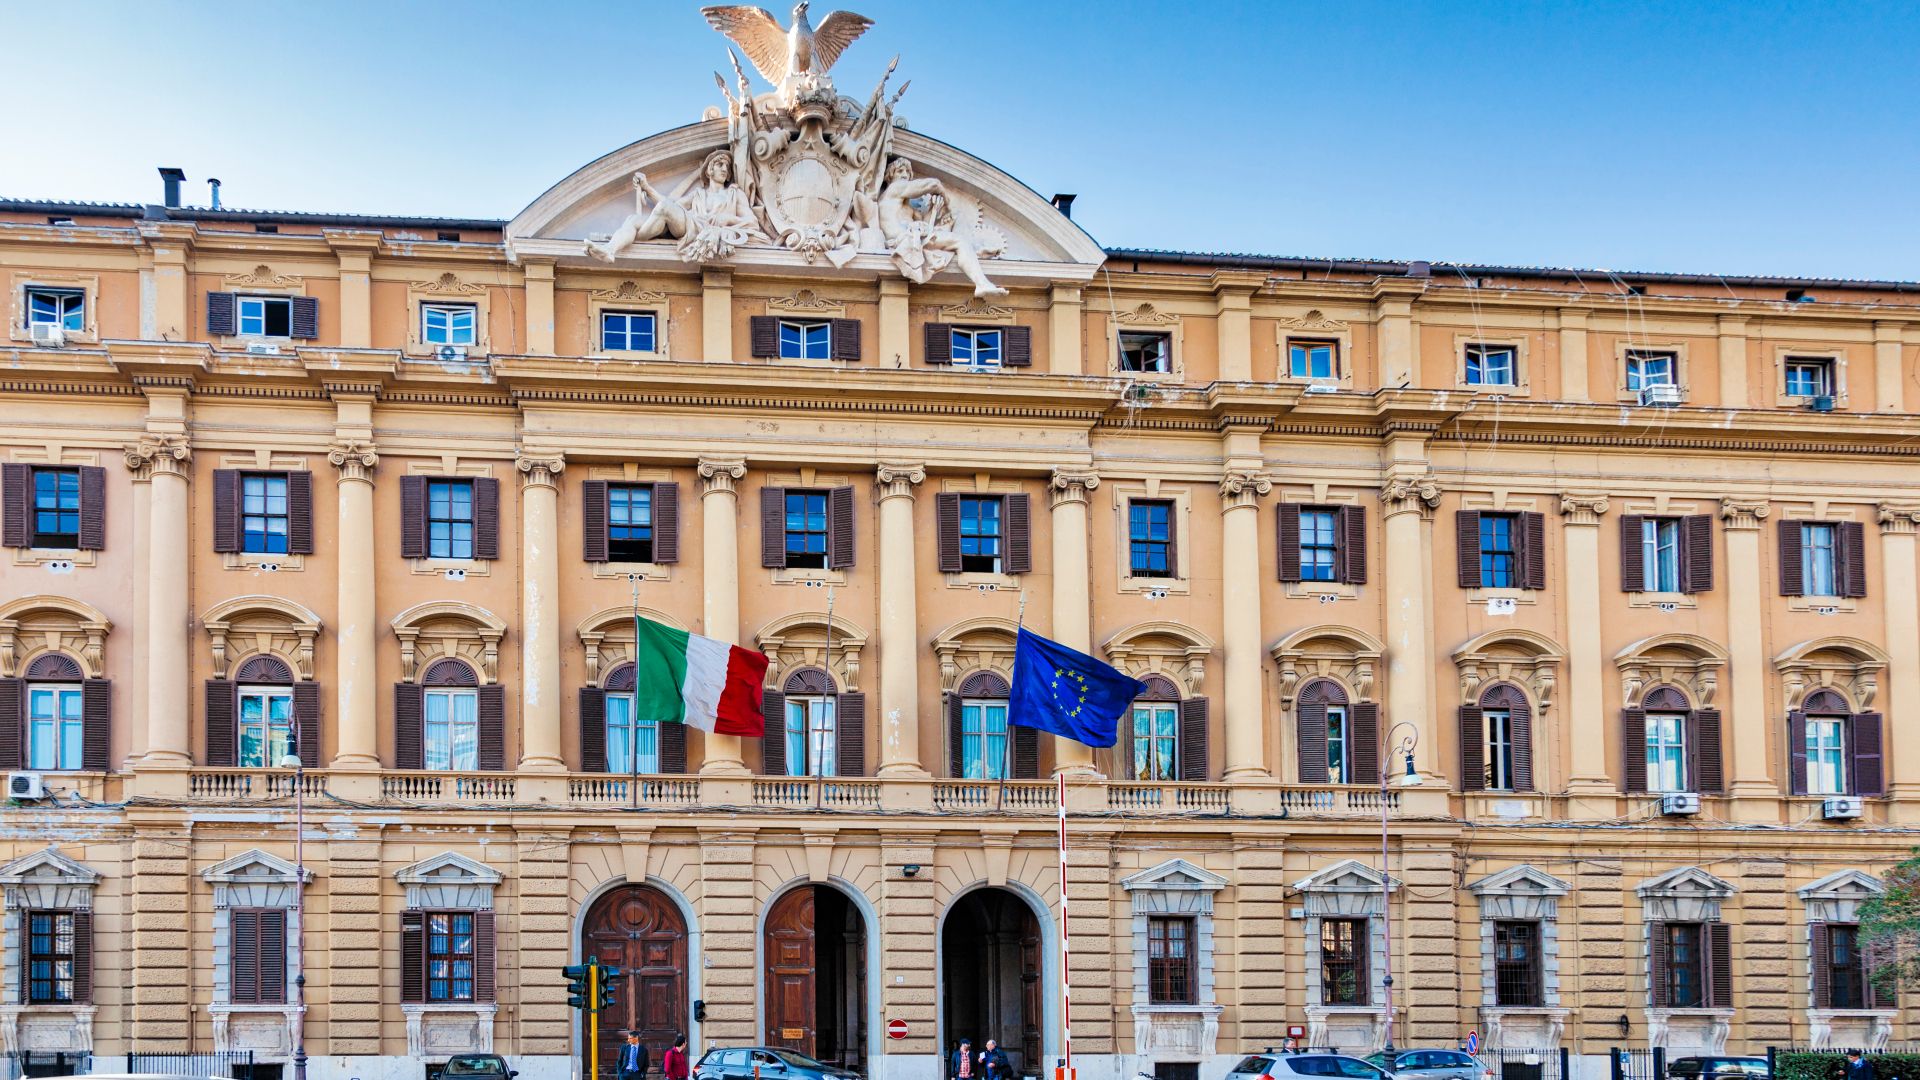 Ministry of Finance and Economics in Italy